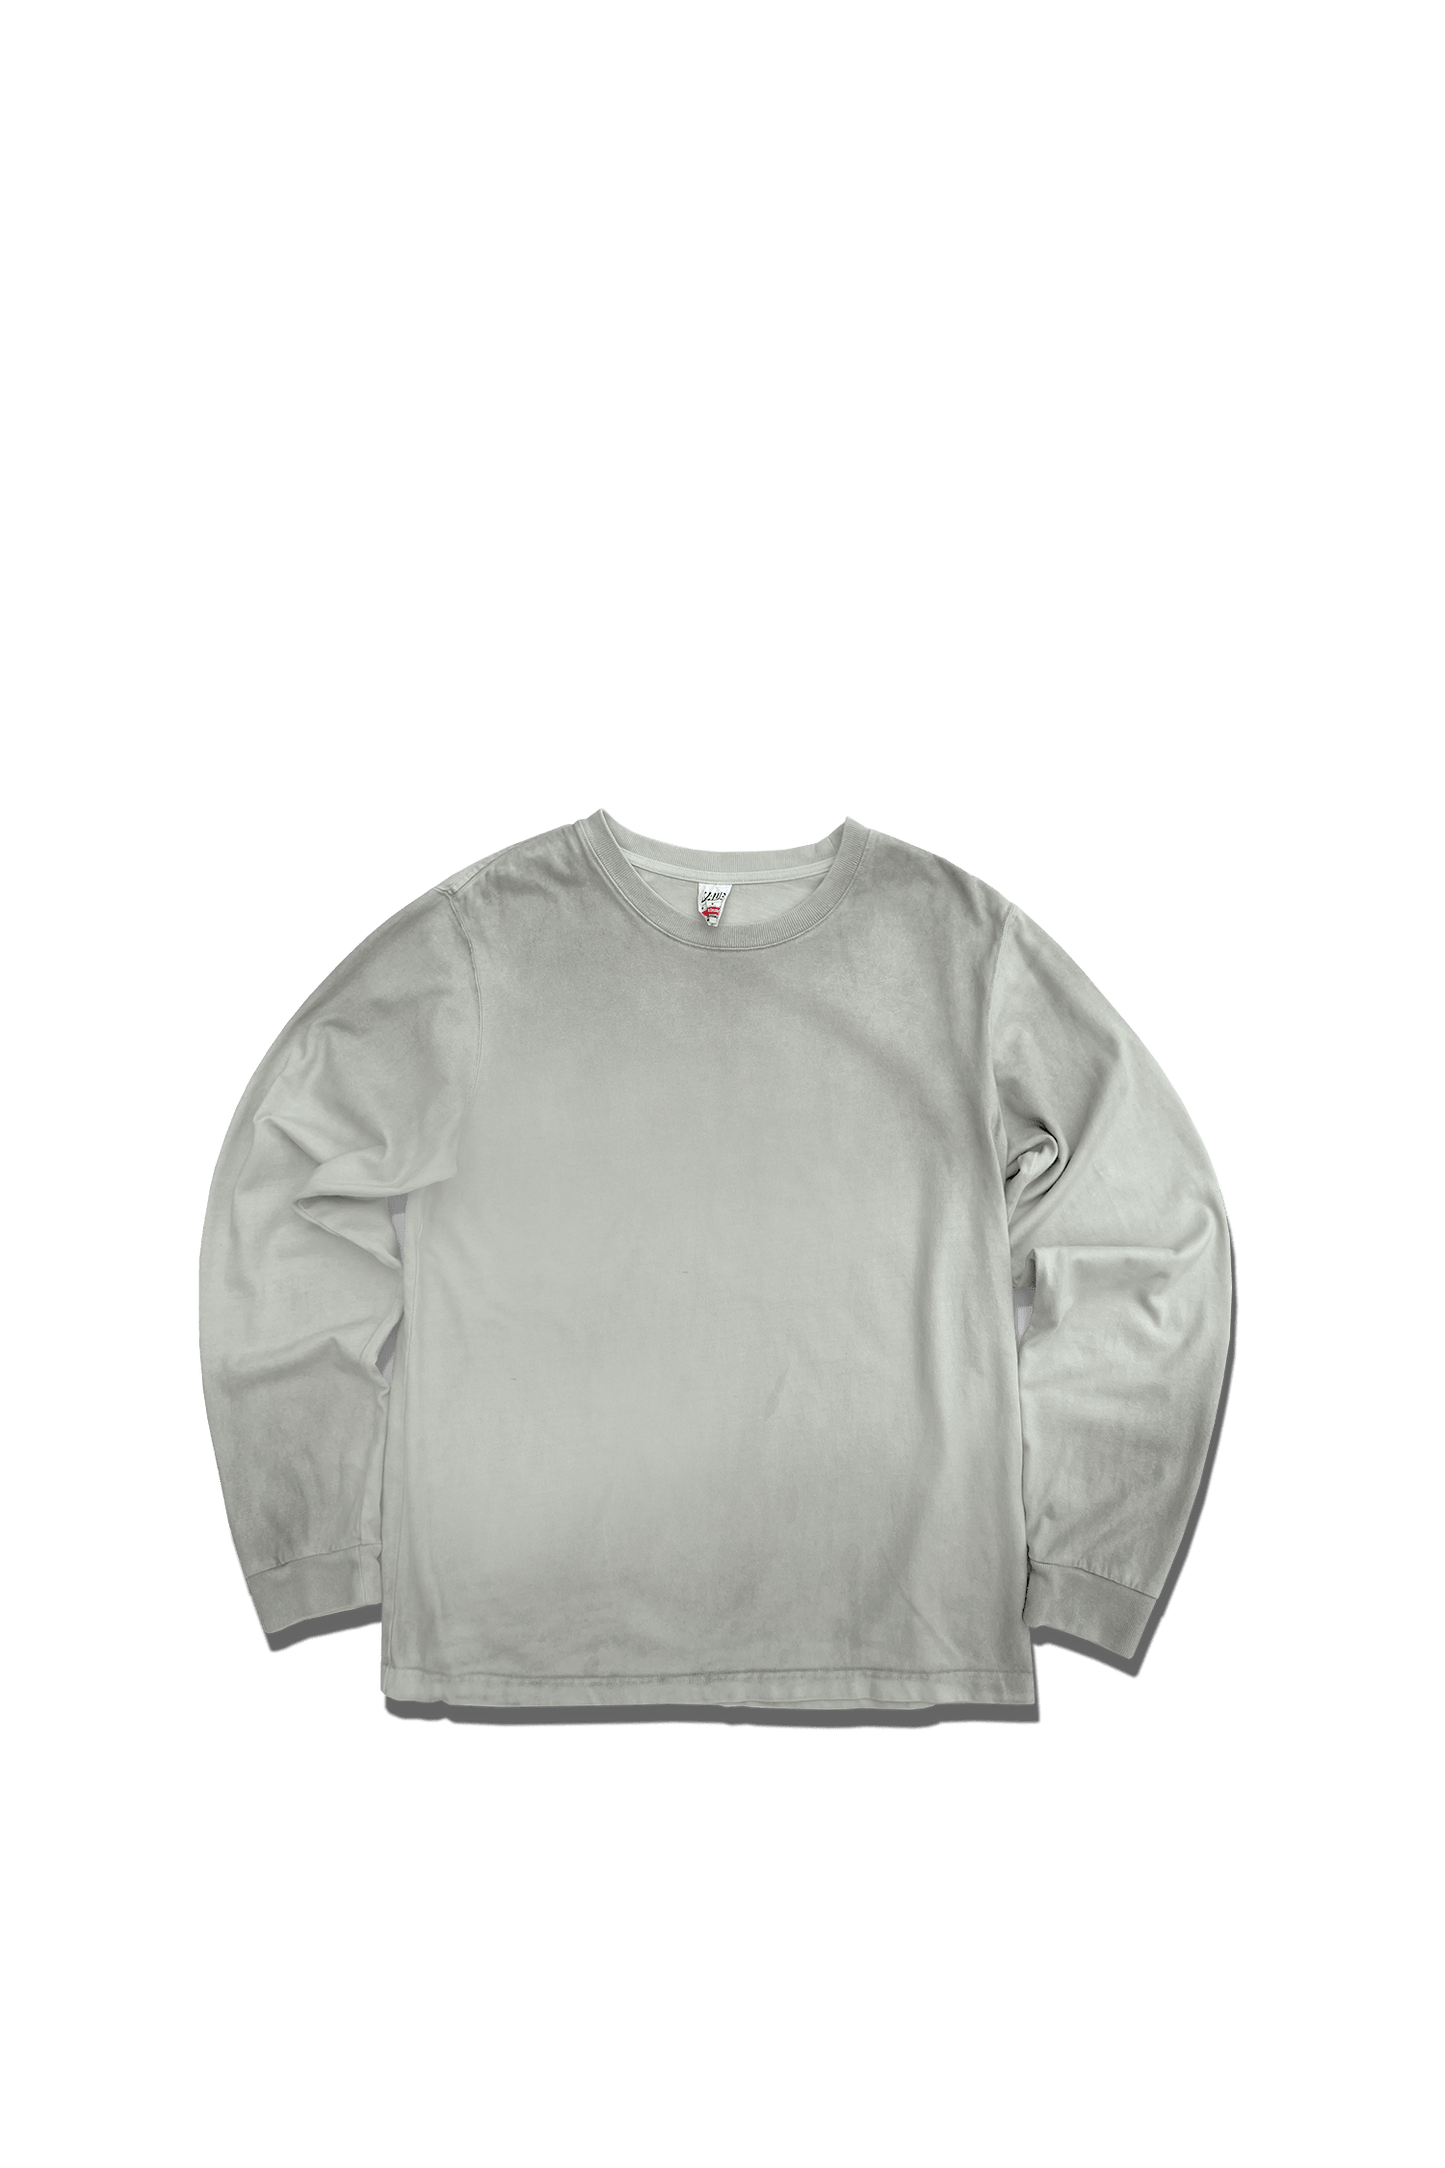 Exclusive Gym Class Longsleeve T-Shirt - Dirty White